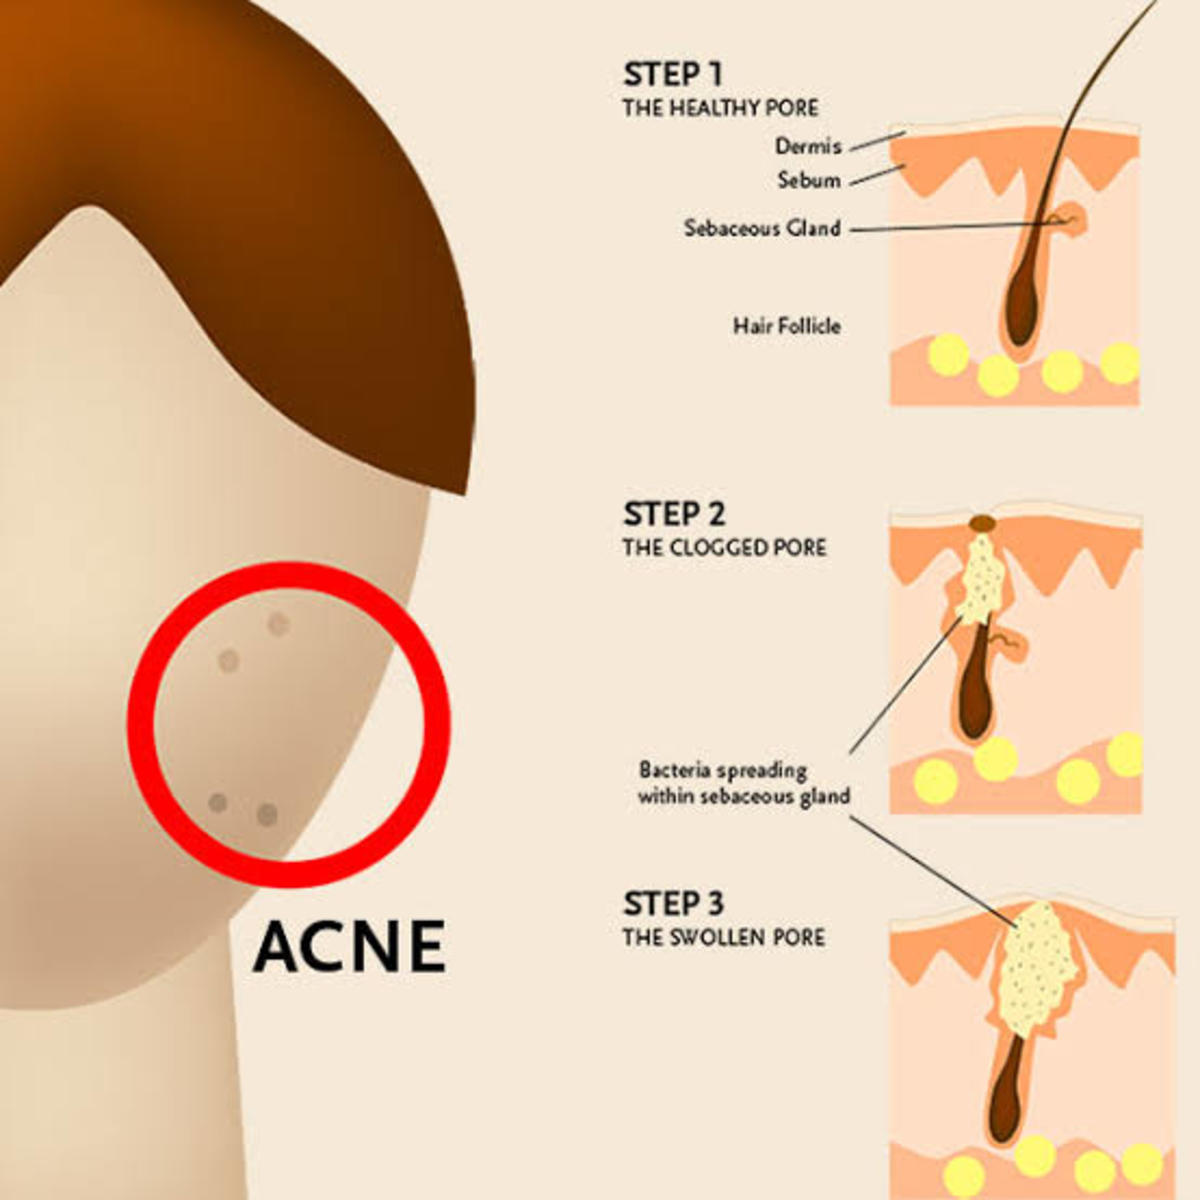 Say Goodbye to Acne, Top Remedies for Acne